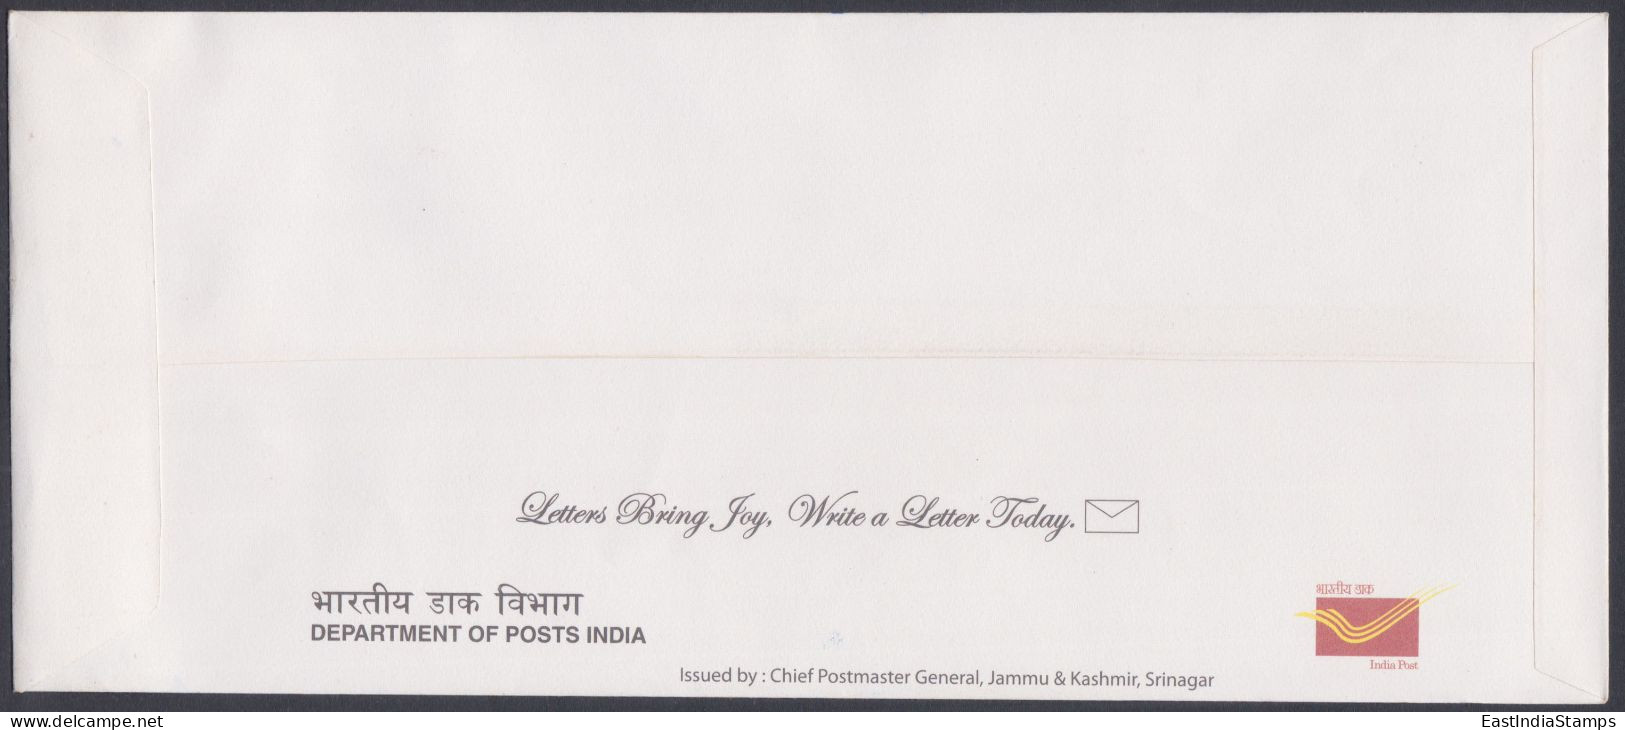 Inde India 2011 Special Cover Hangul, Red Deer, Wildlife, Wild Life, Animal, Animals, Pictorial Postmark - Covers & Documents